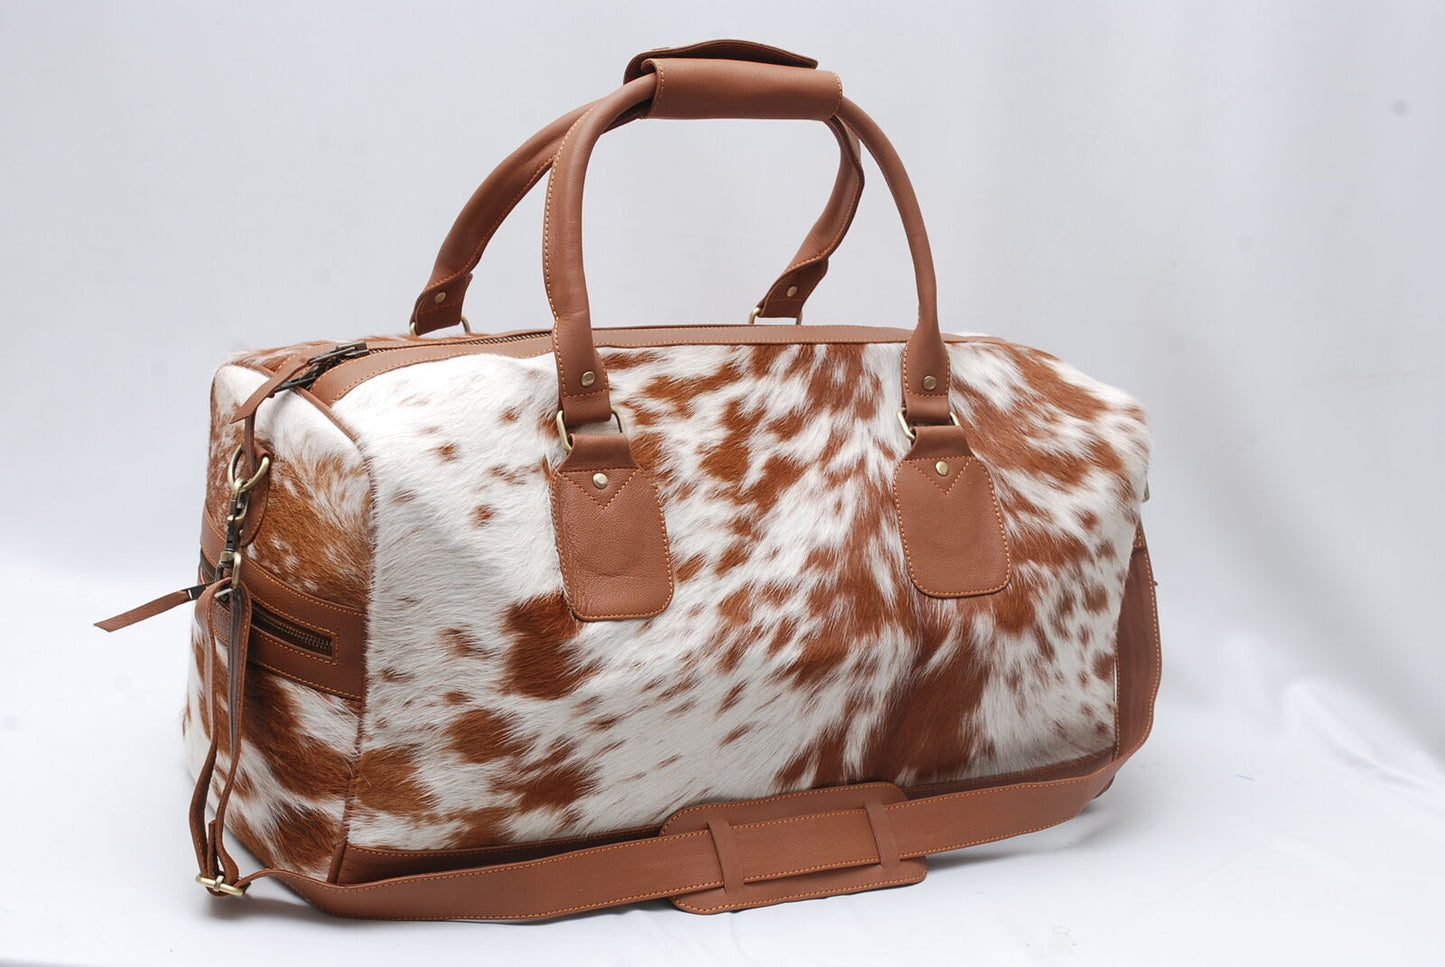 Brown White Cow Skin Overnight Duffle Bag